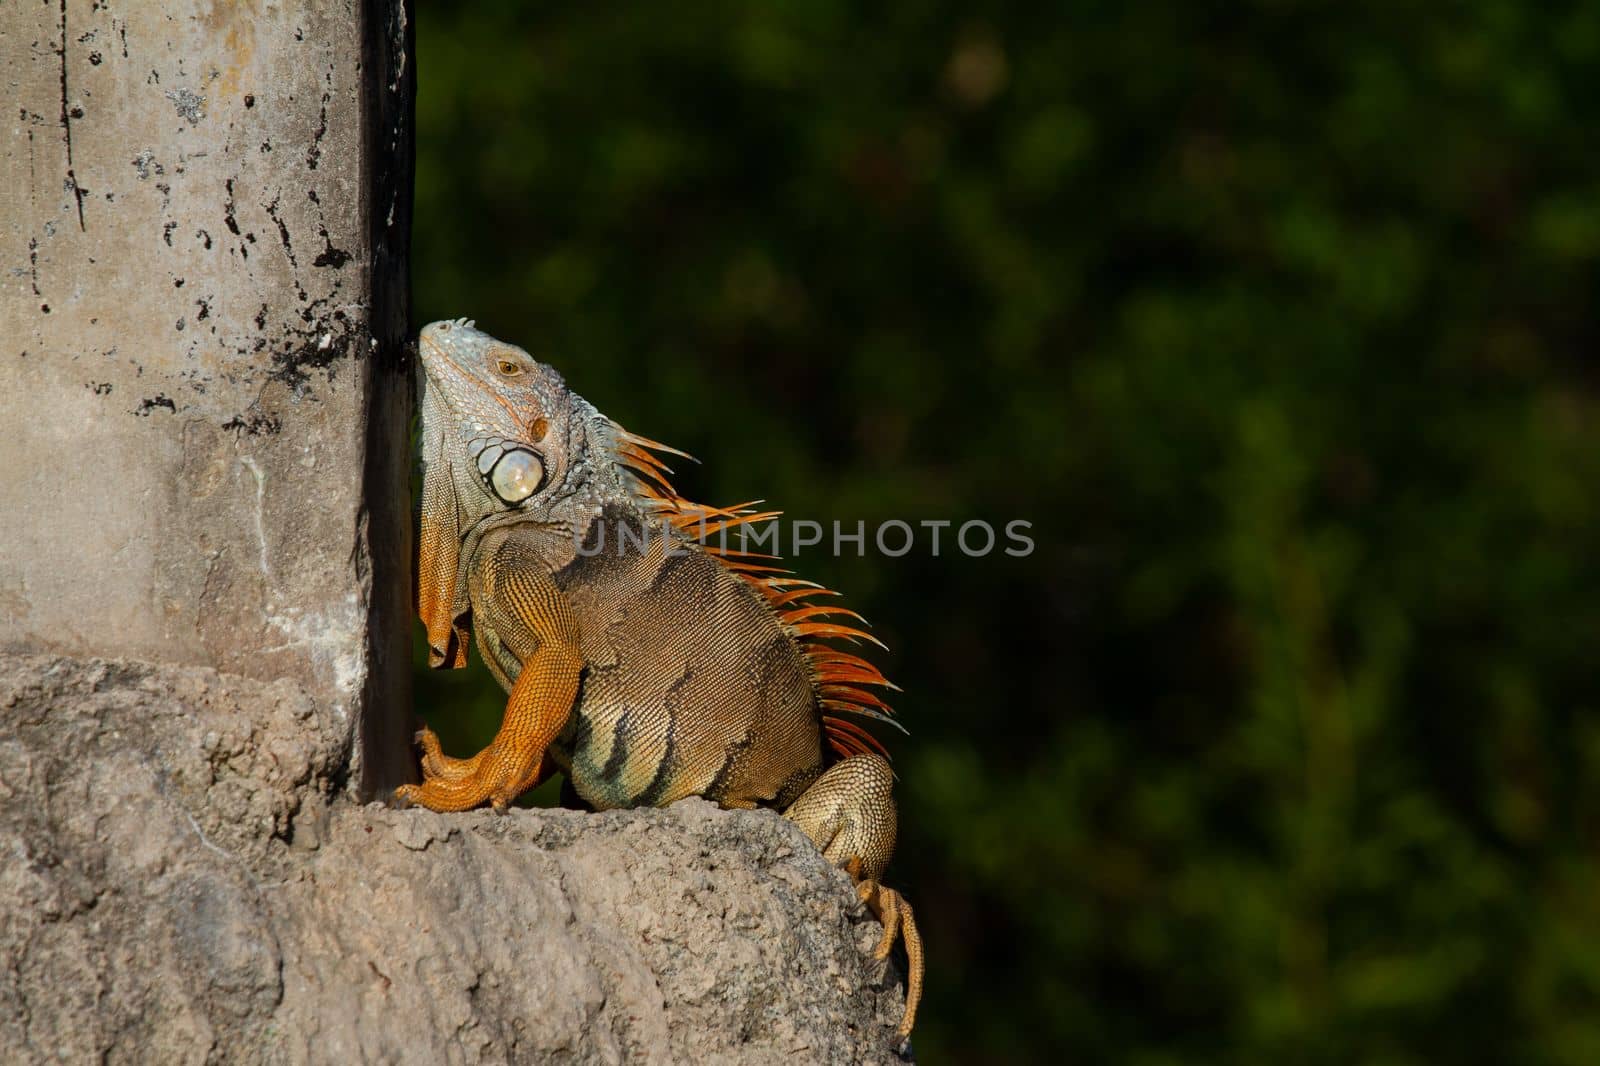 An exotic green iguana basking in the Florida sunlight, Key West by Granchinho